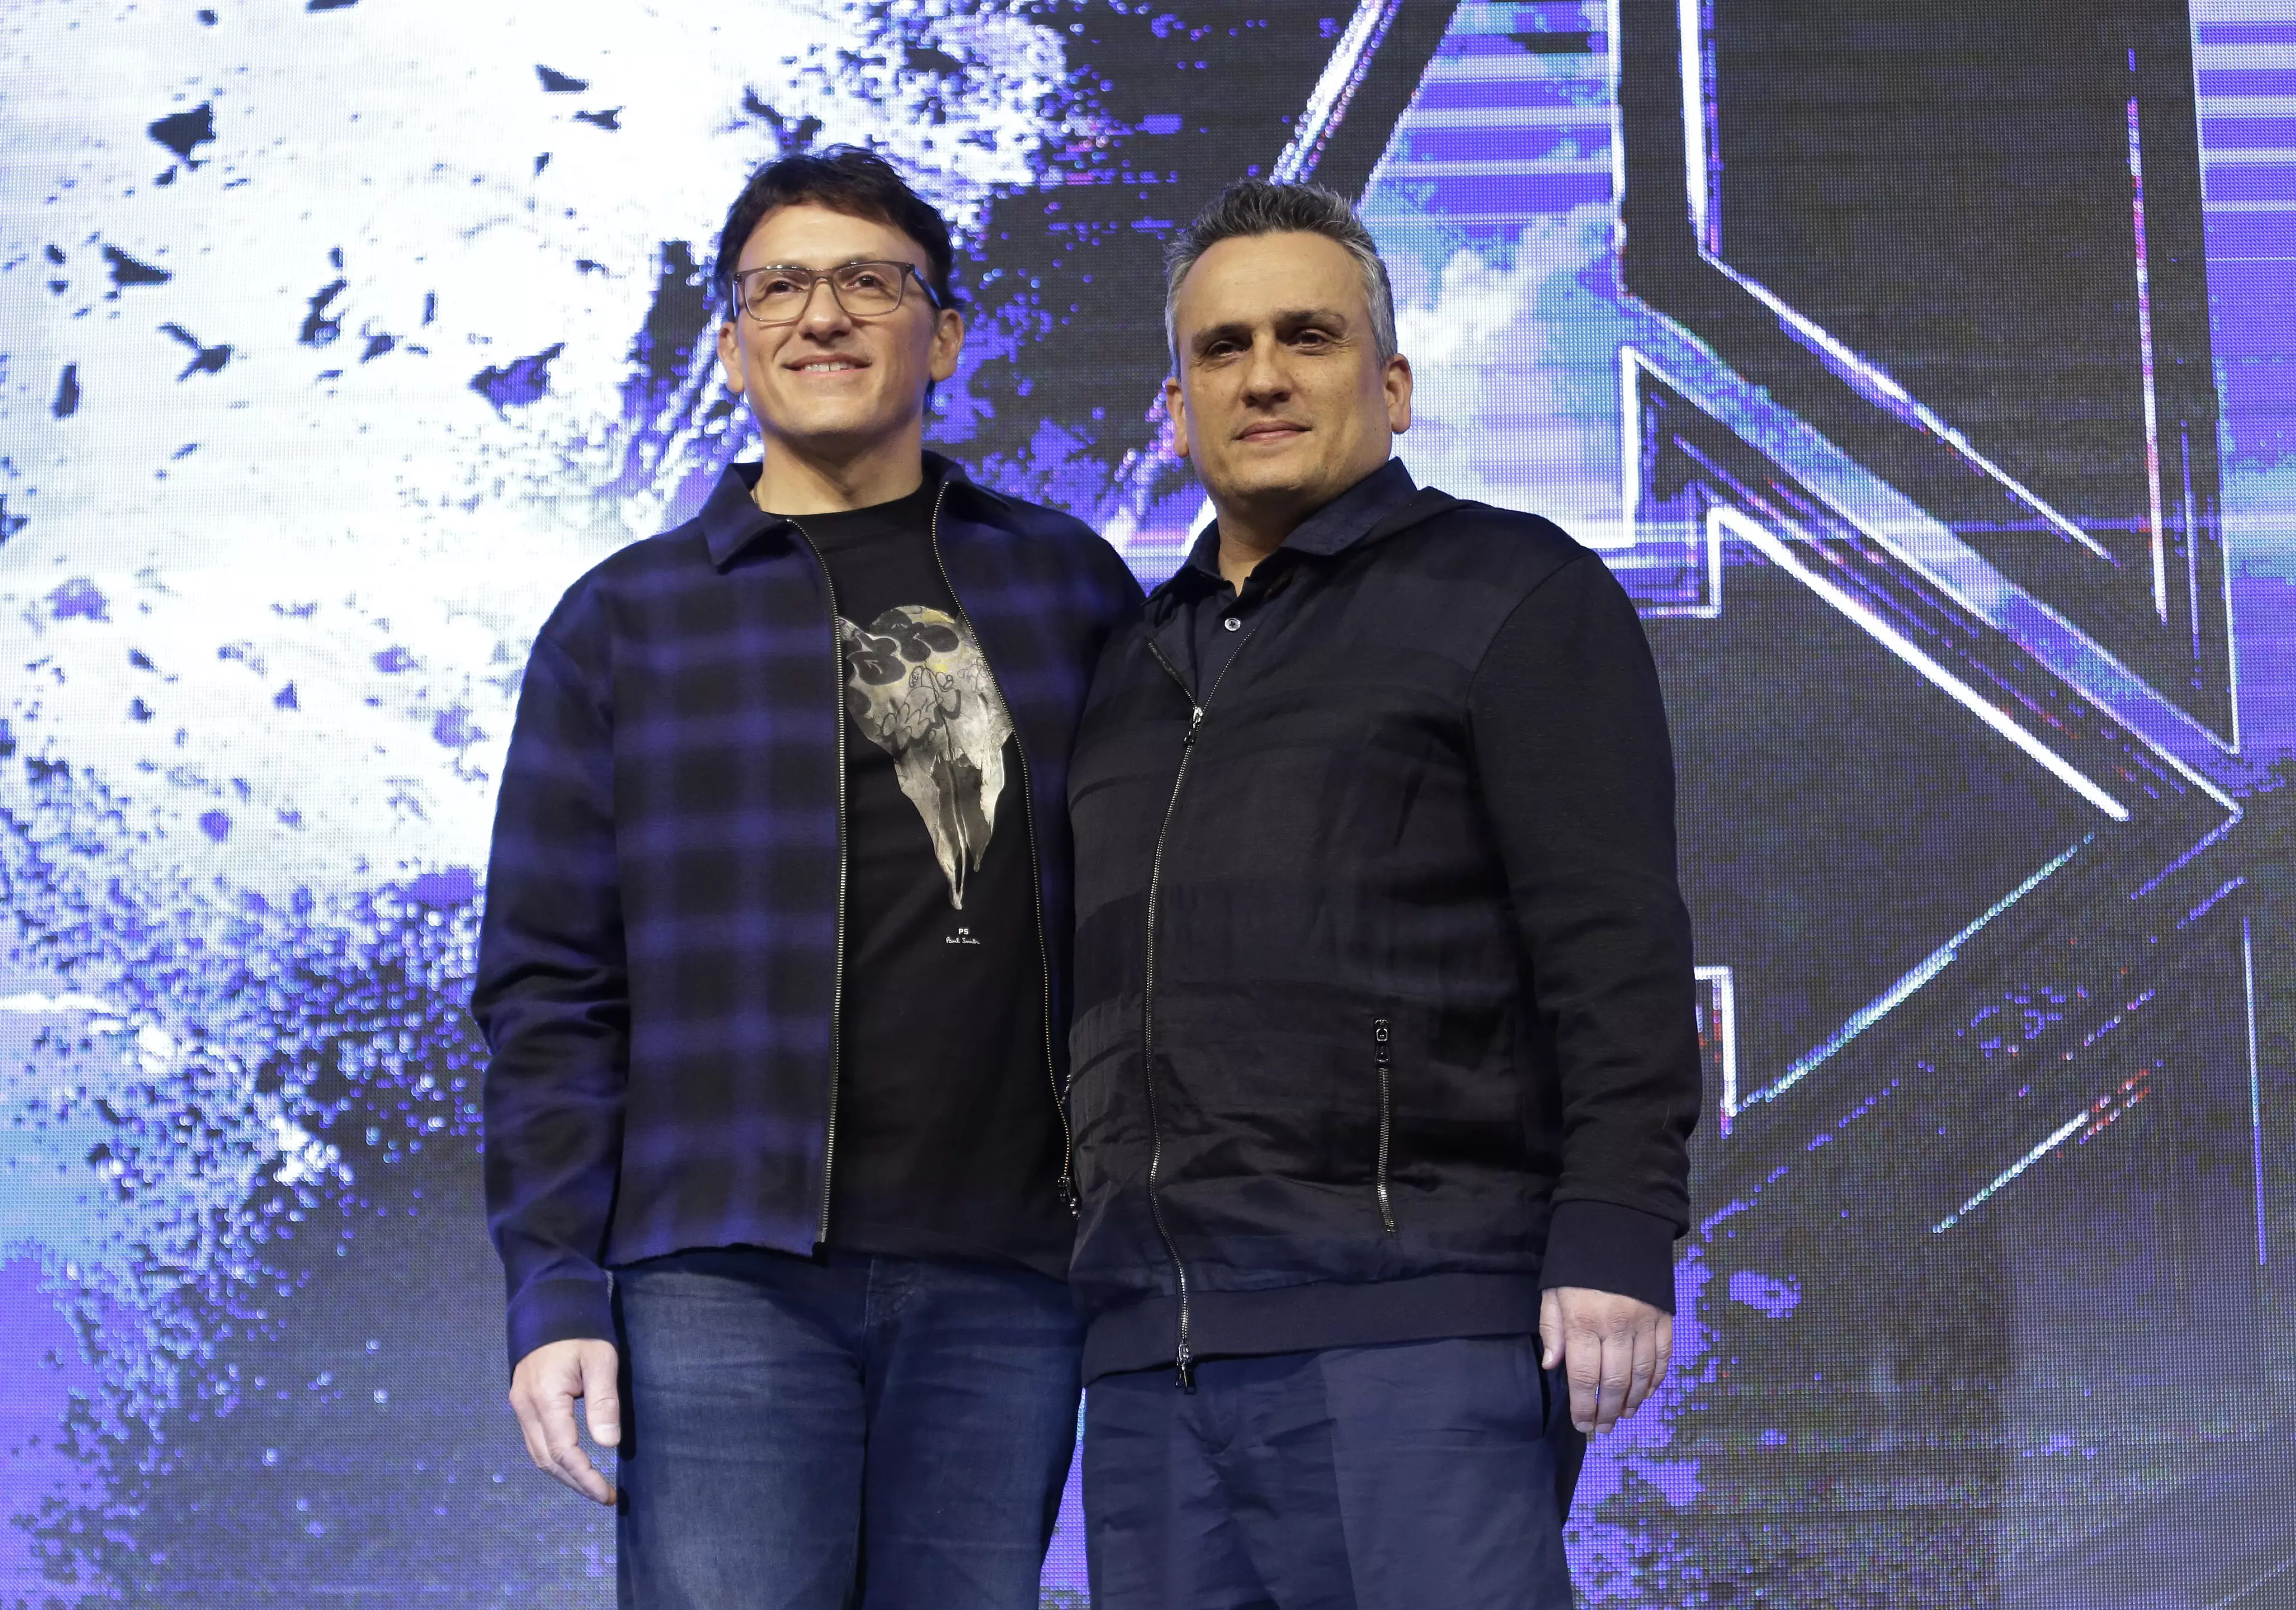 The Russo brothers have encouraged fans not to spoil the film.